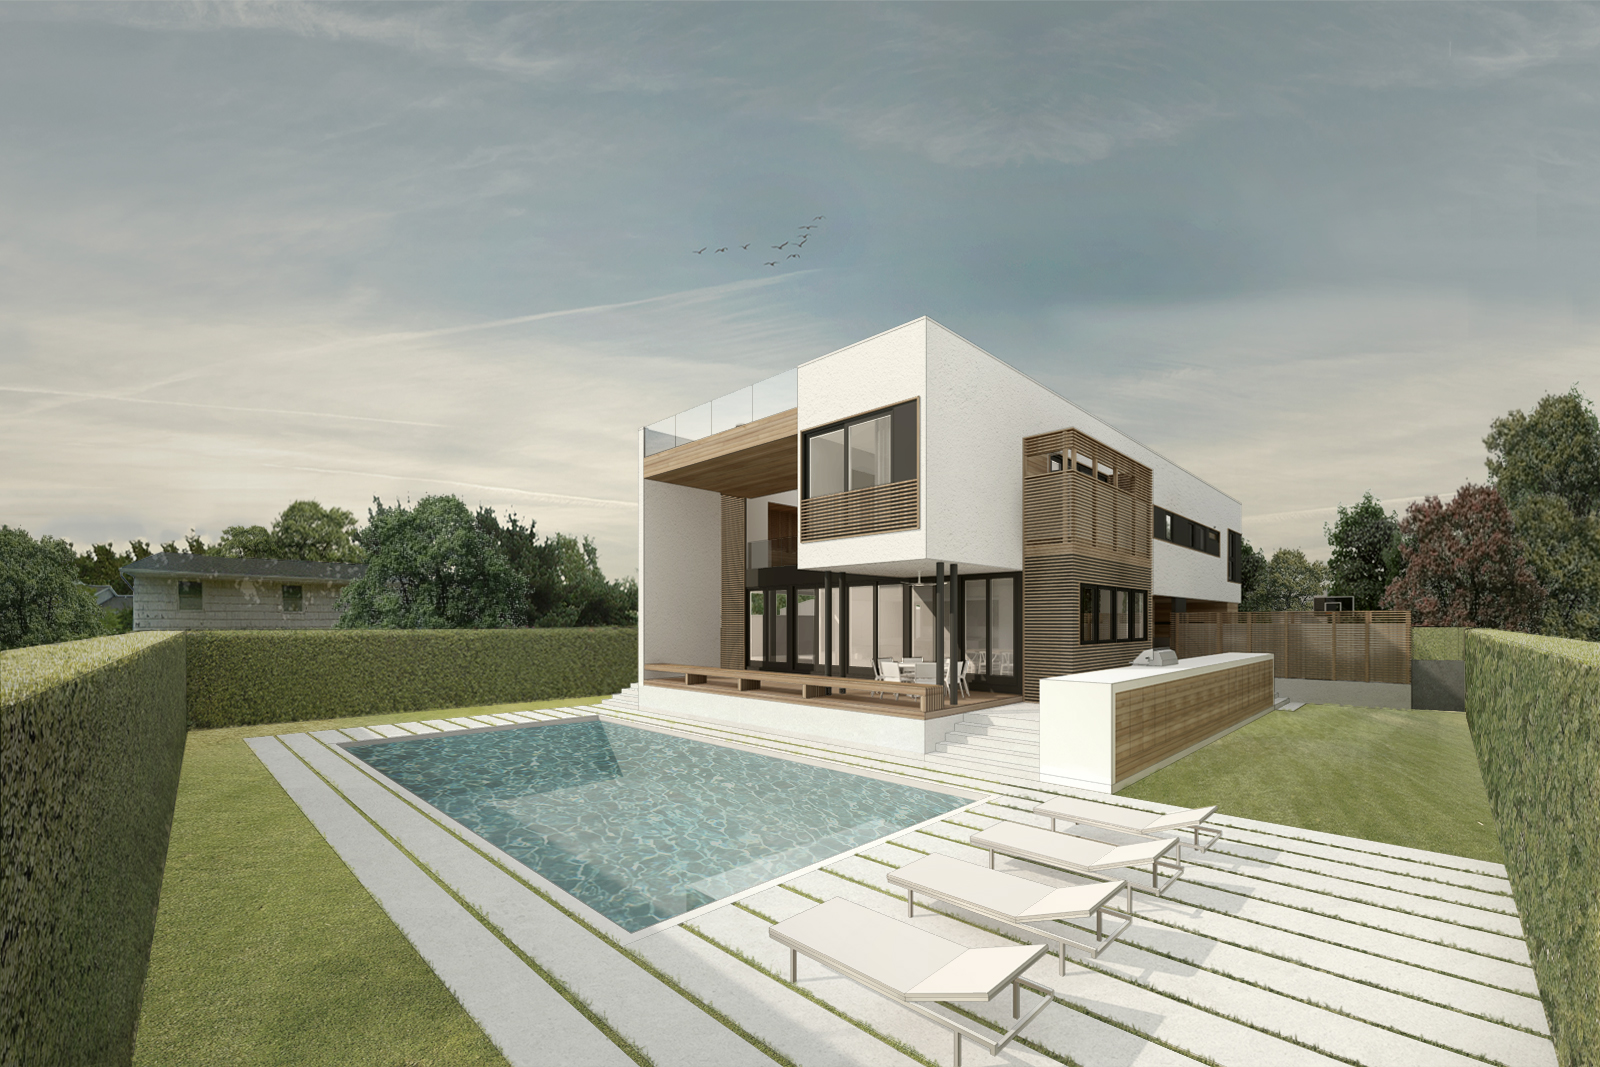 02-res4-resolution-4-architecture-modern-modular-prefab-long-beach-house-exterior-elevation-perspective-rendering.jpg